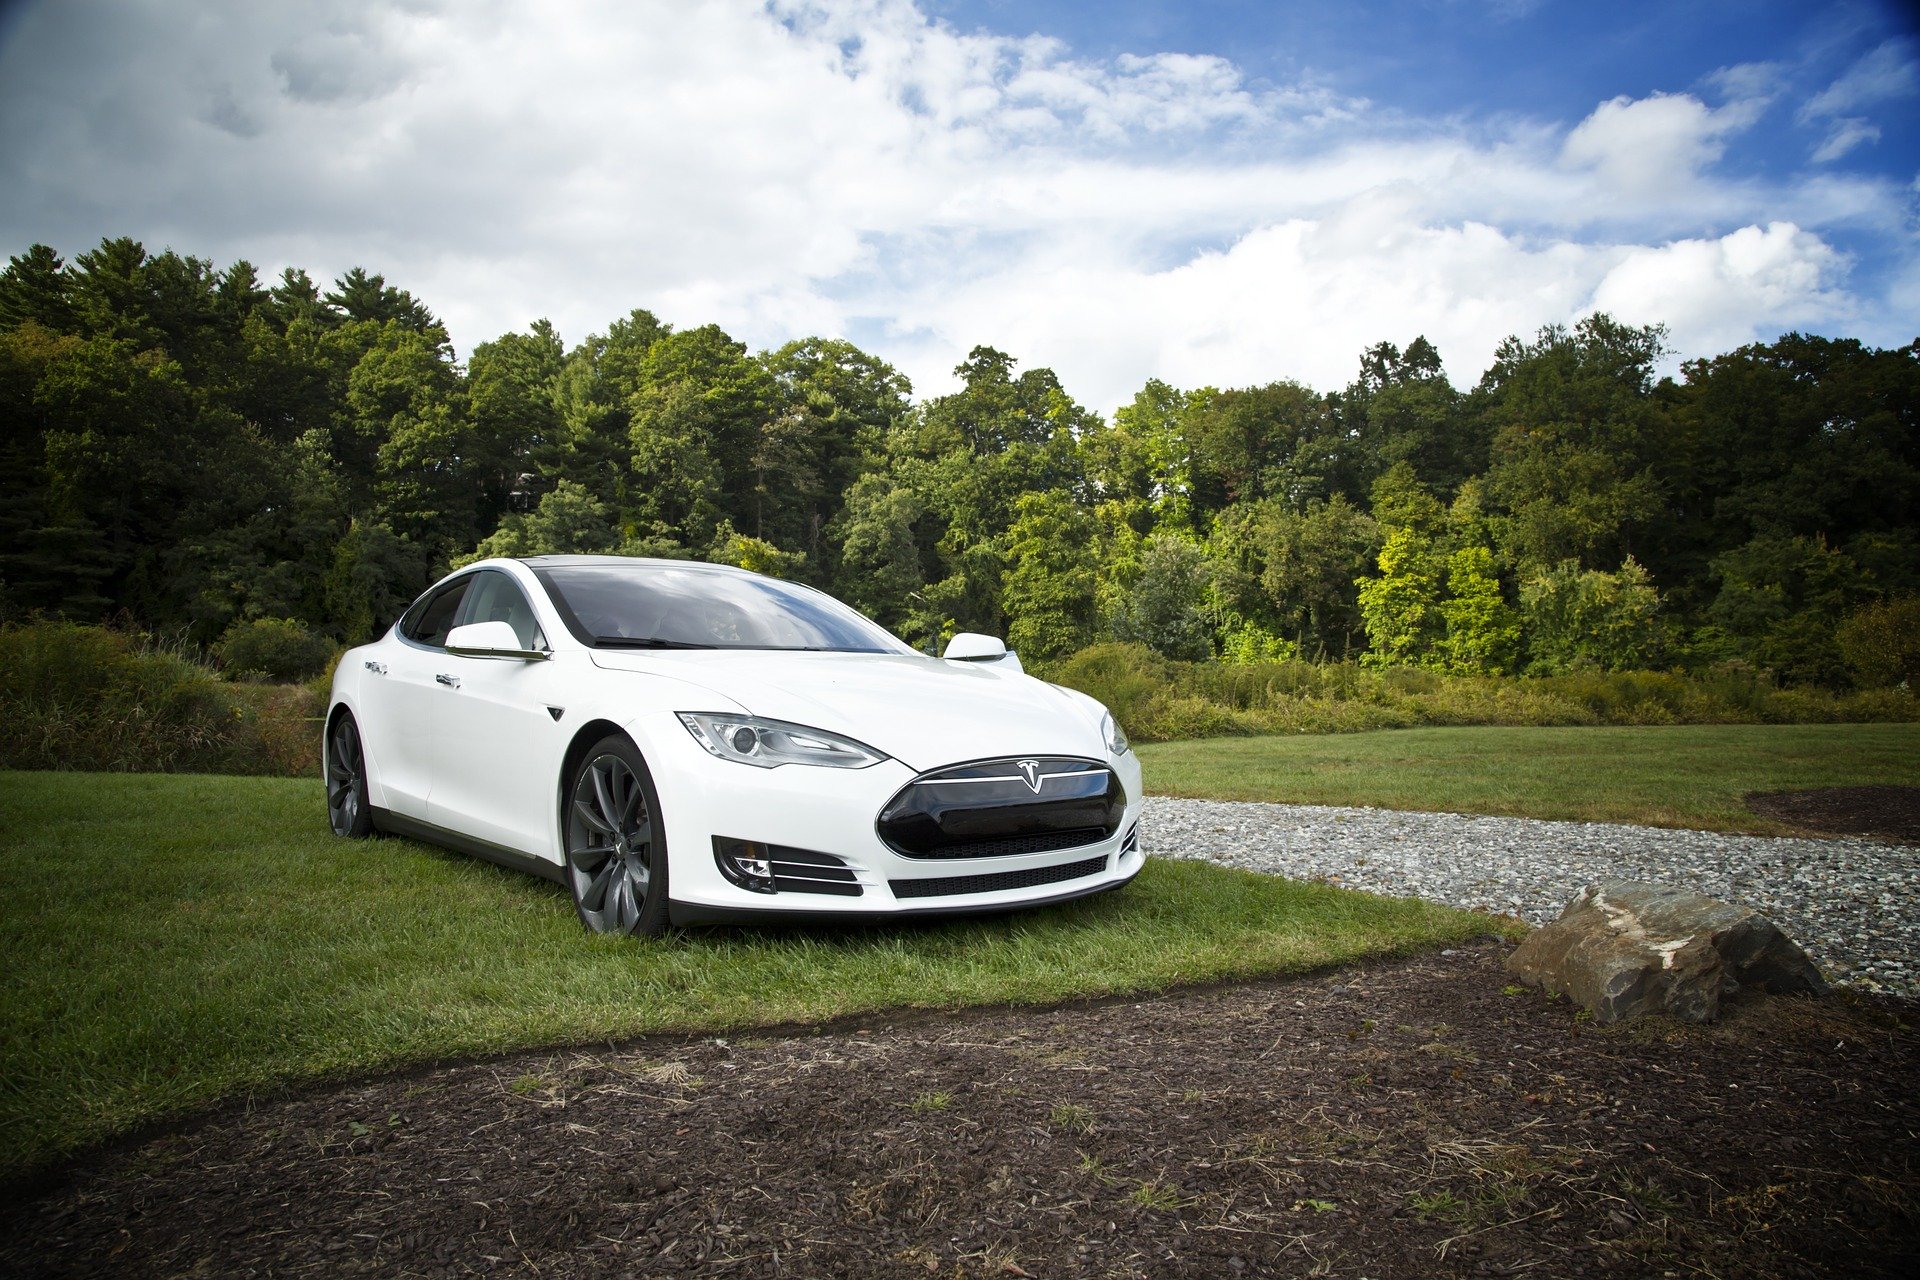 Pictured - A white electric Tesla car | Source: Pixabay